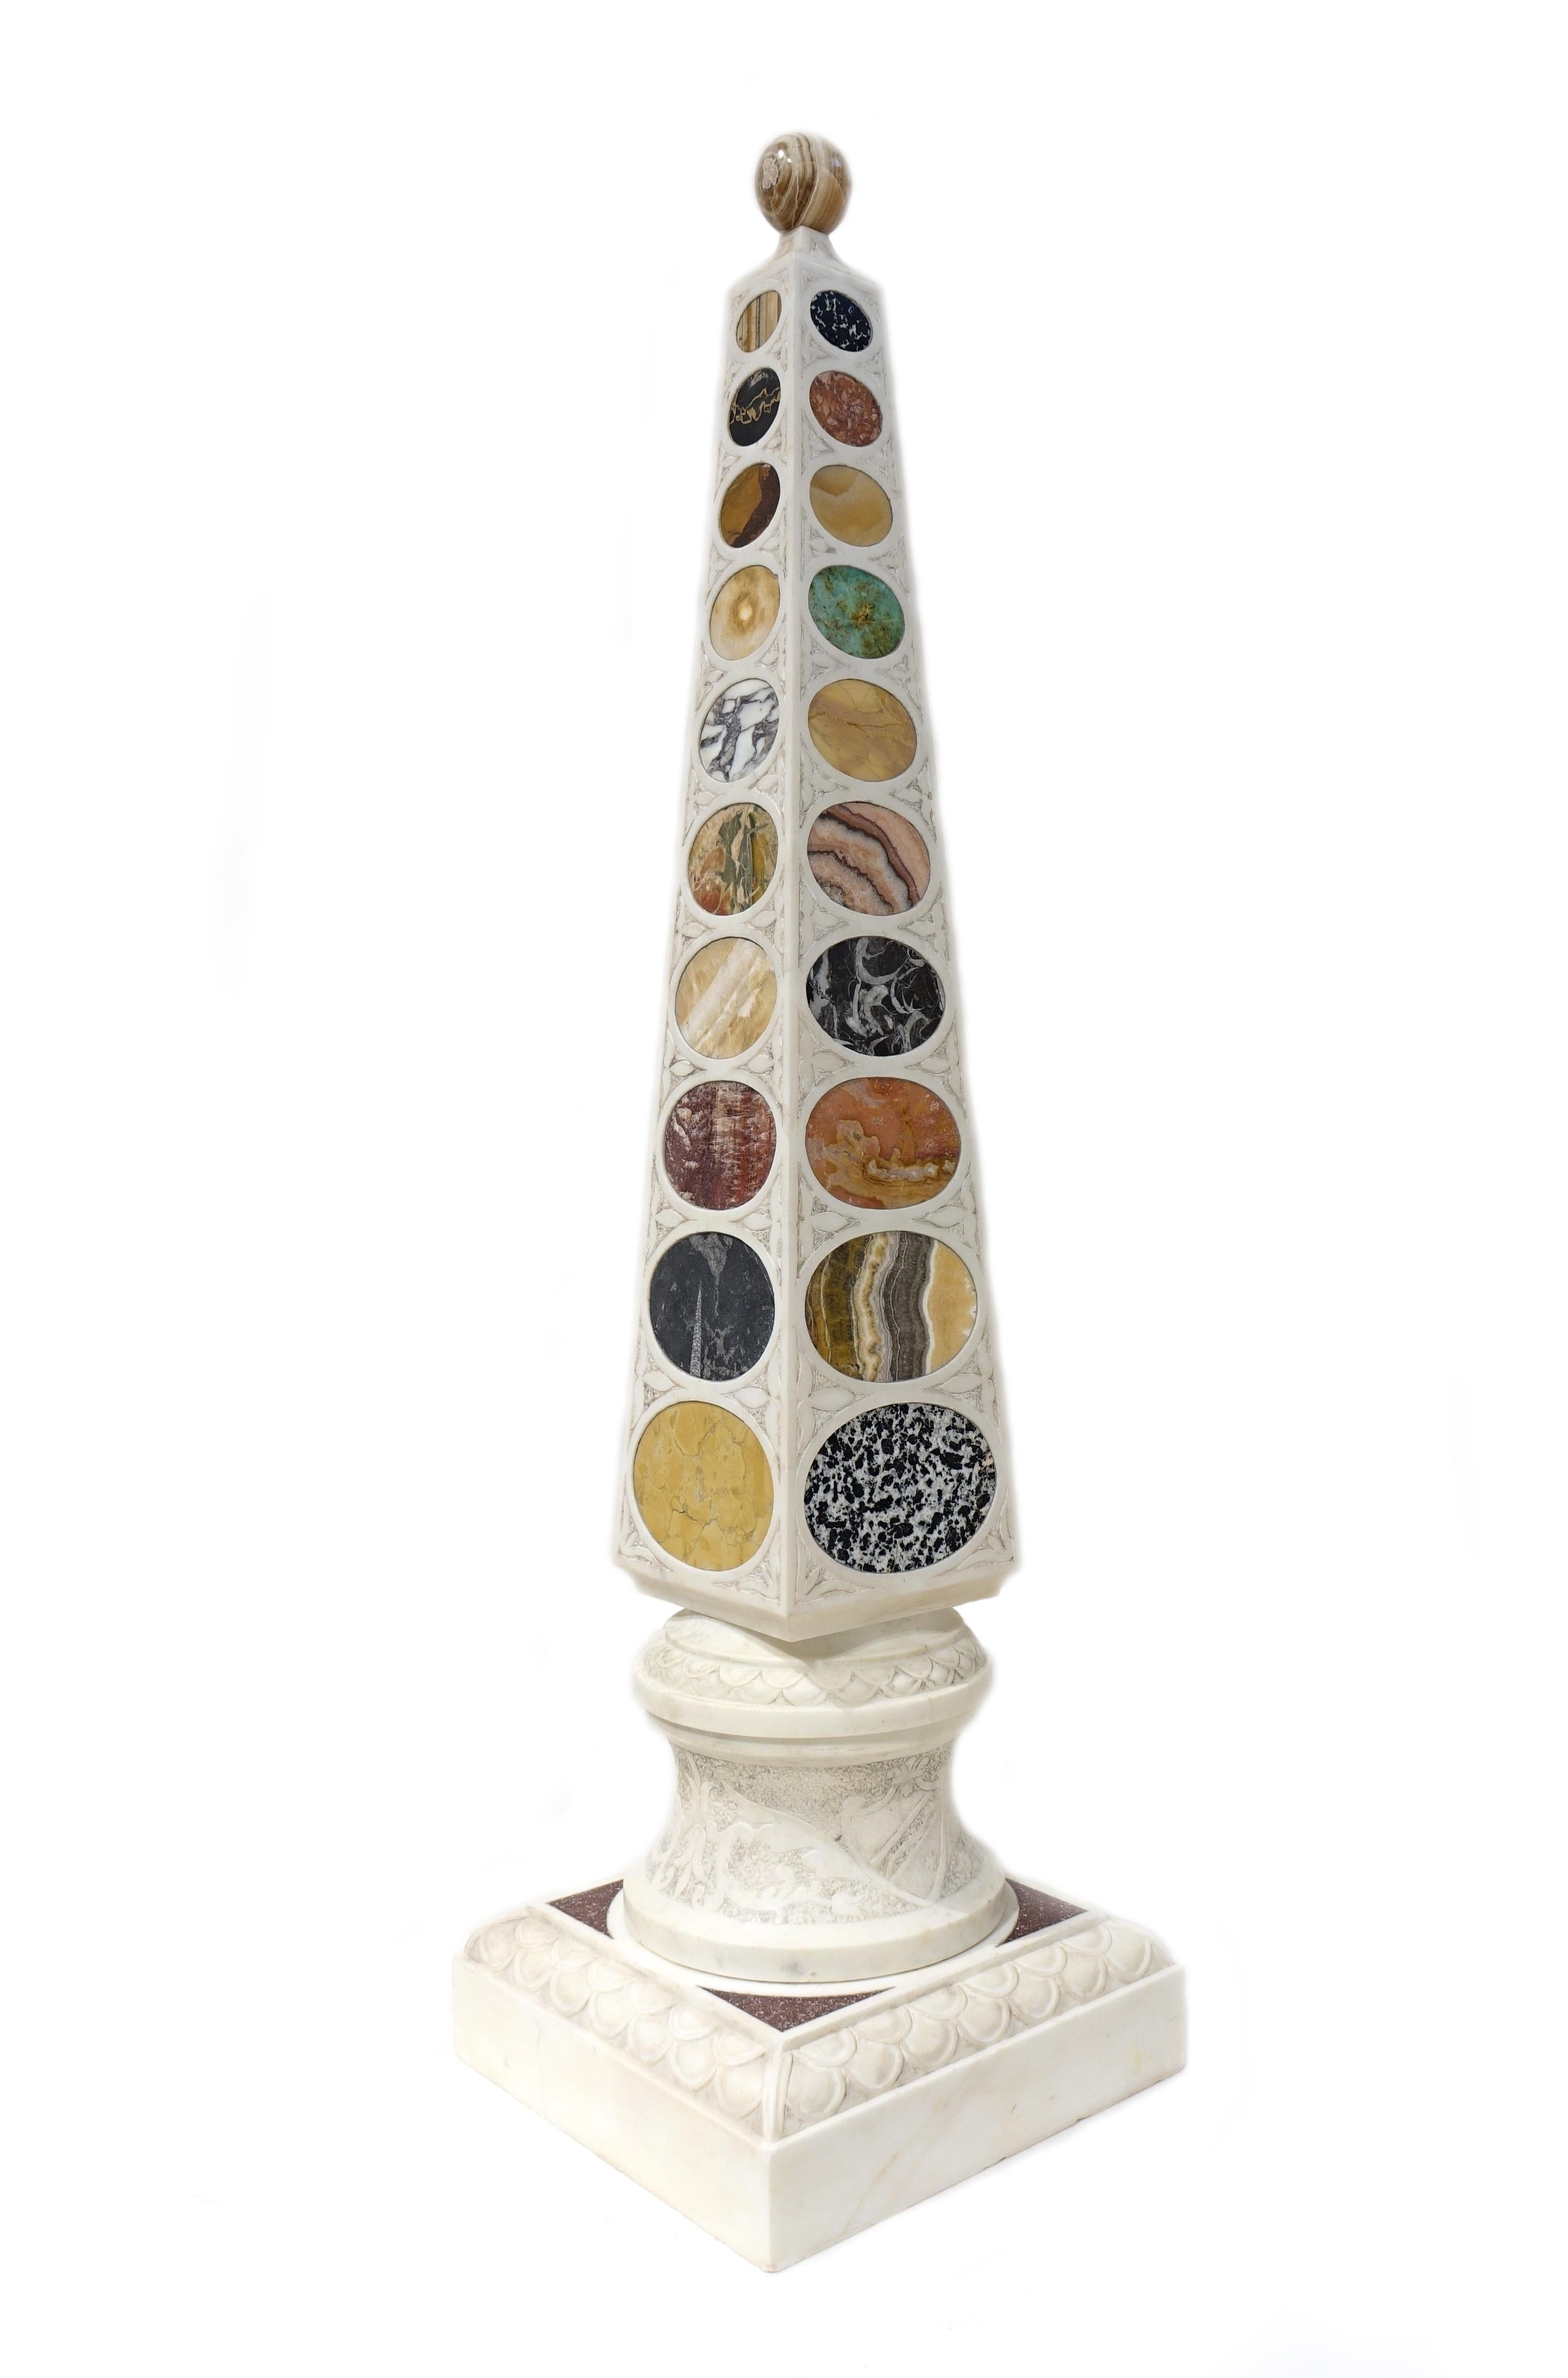 Pair of obelisks in white Carrara marble with base carved with low relief decorations and
with sampling of rare marbles on 4 sides.
The top sphere is made with flowery onyx.
The samples present different types of marble: Portoro di Portovenere,